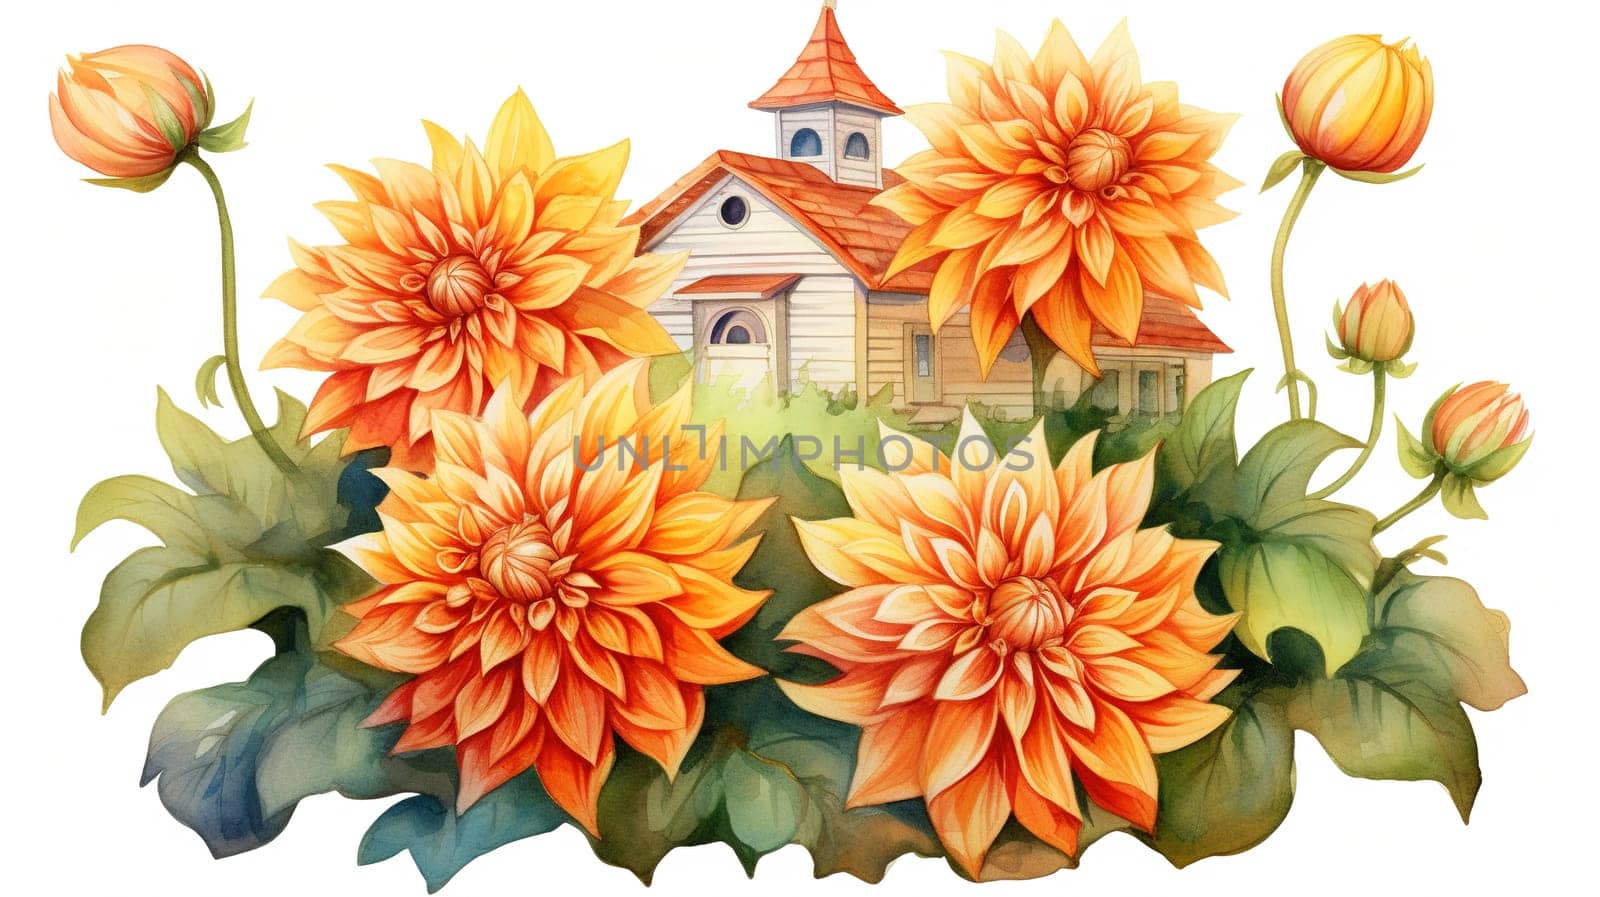 Charming wooden fairy house among orange dahlias and ripe pumpkins, beautiful red roof and brick chimney,garden by KaterinaDalemans